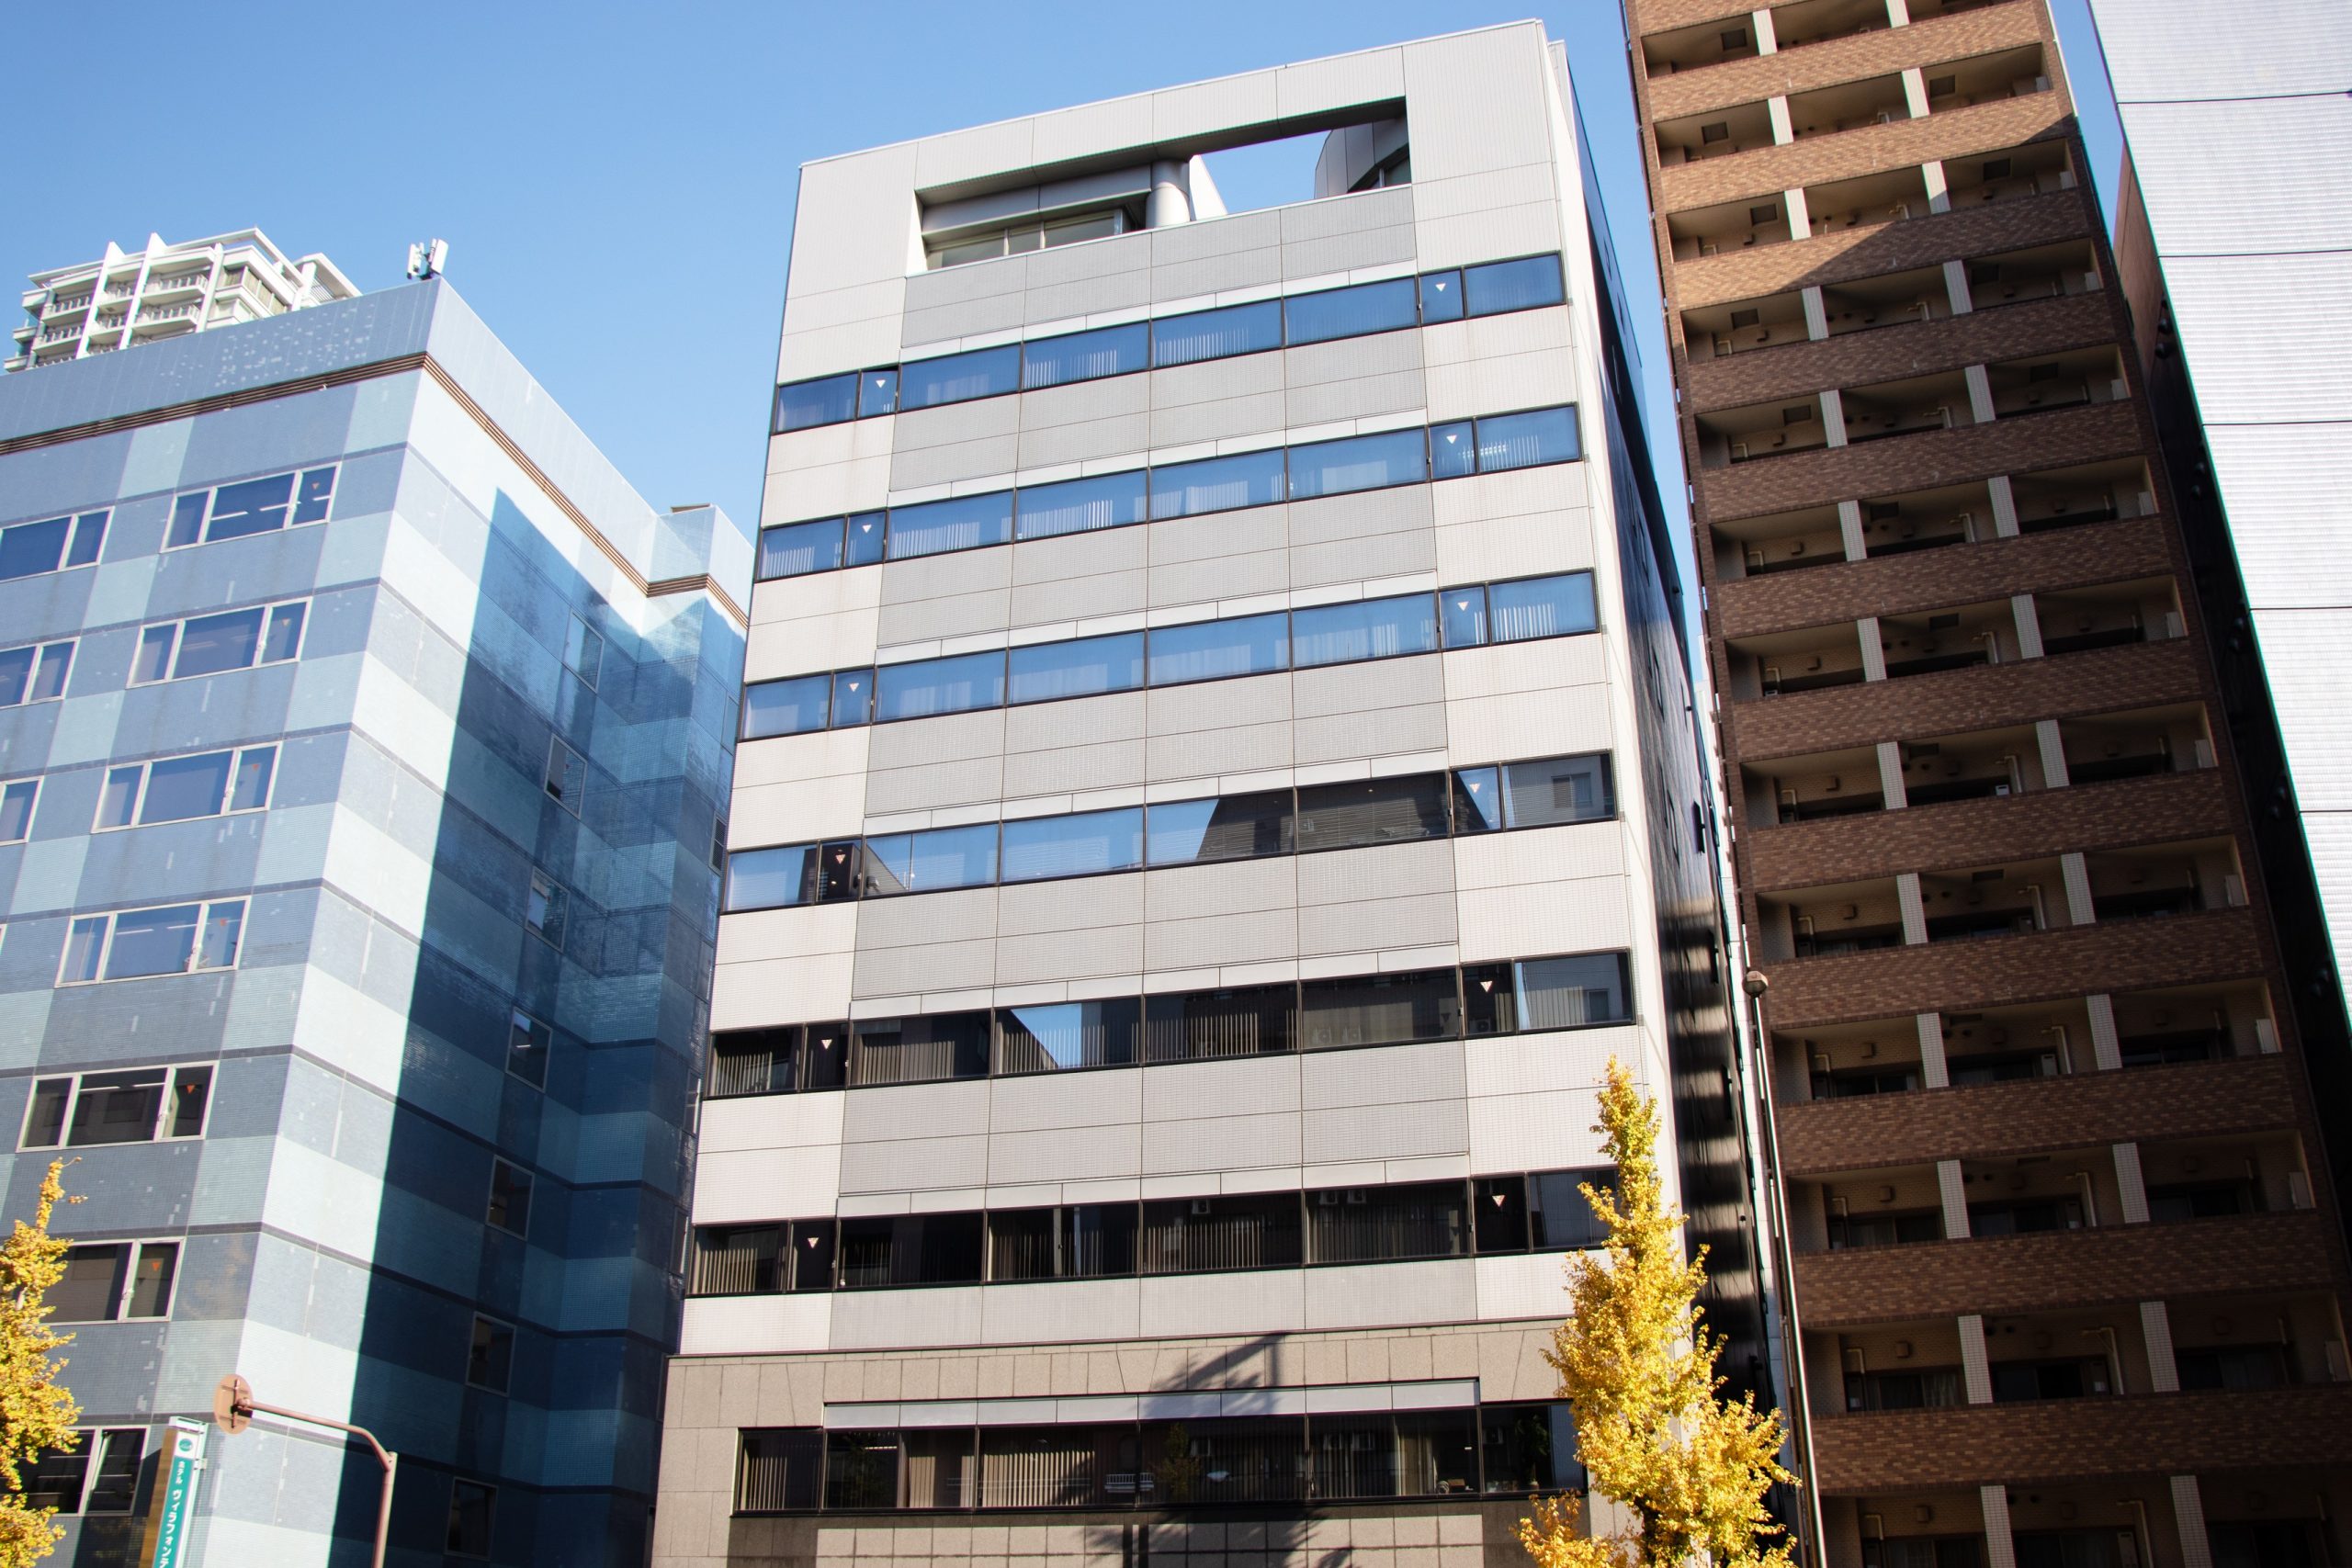 image of the company office in Tokio taken from outside